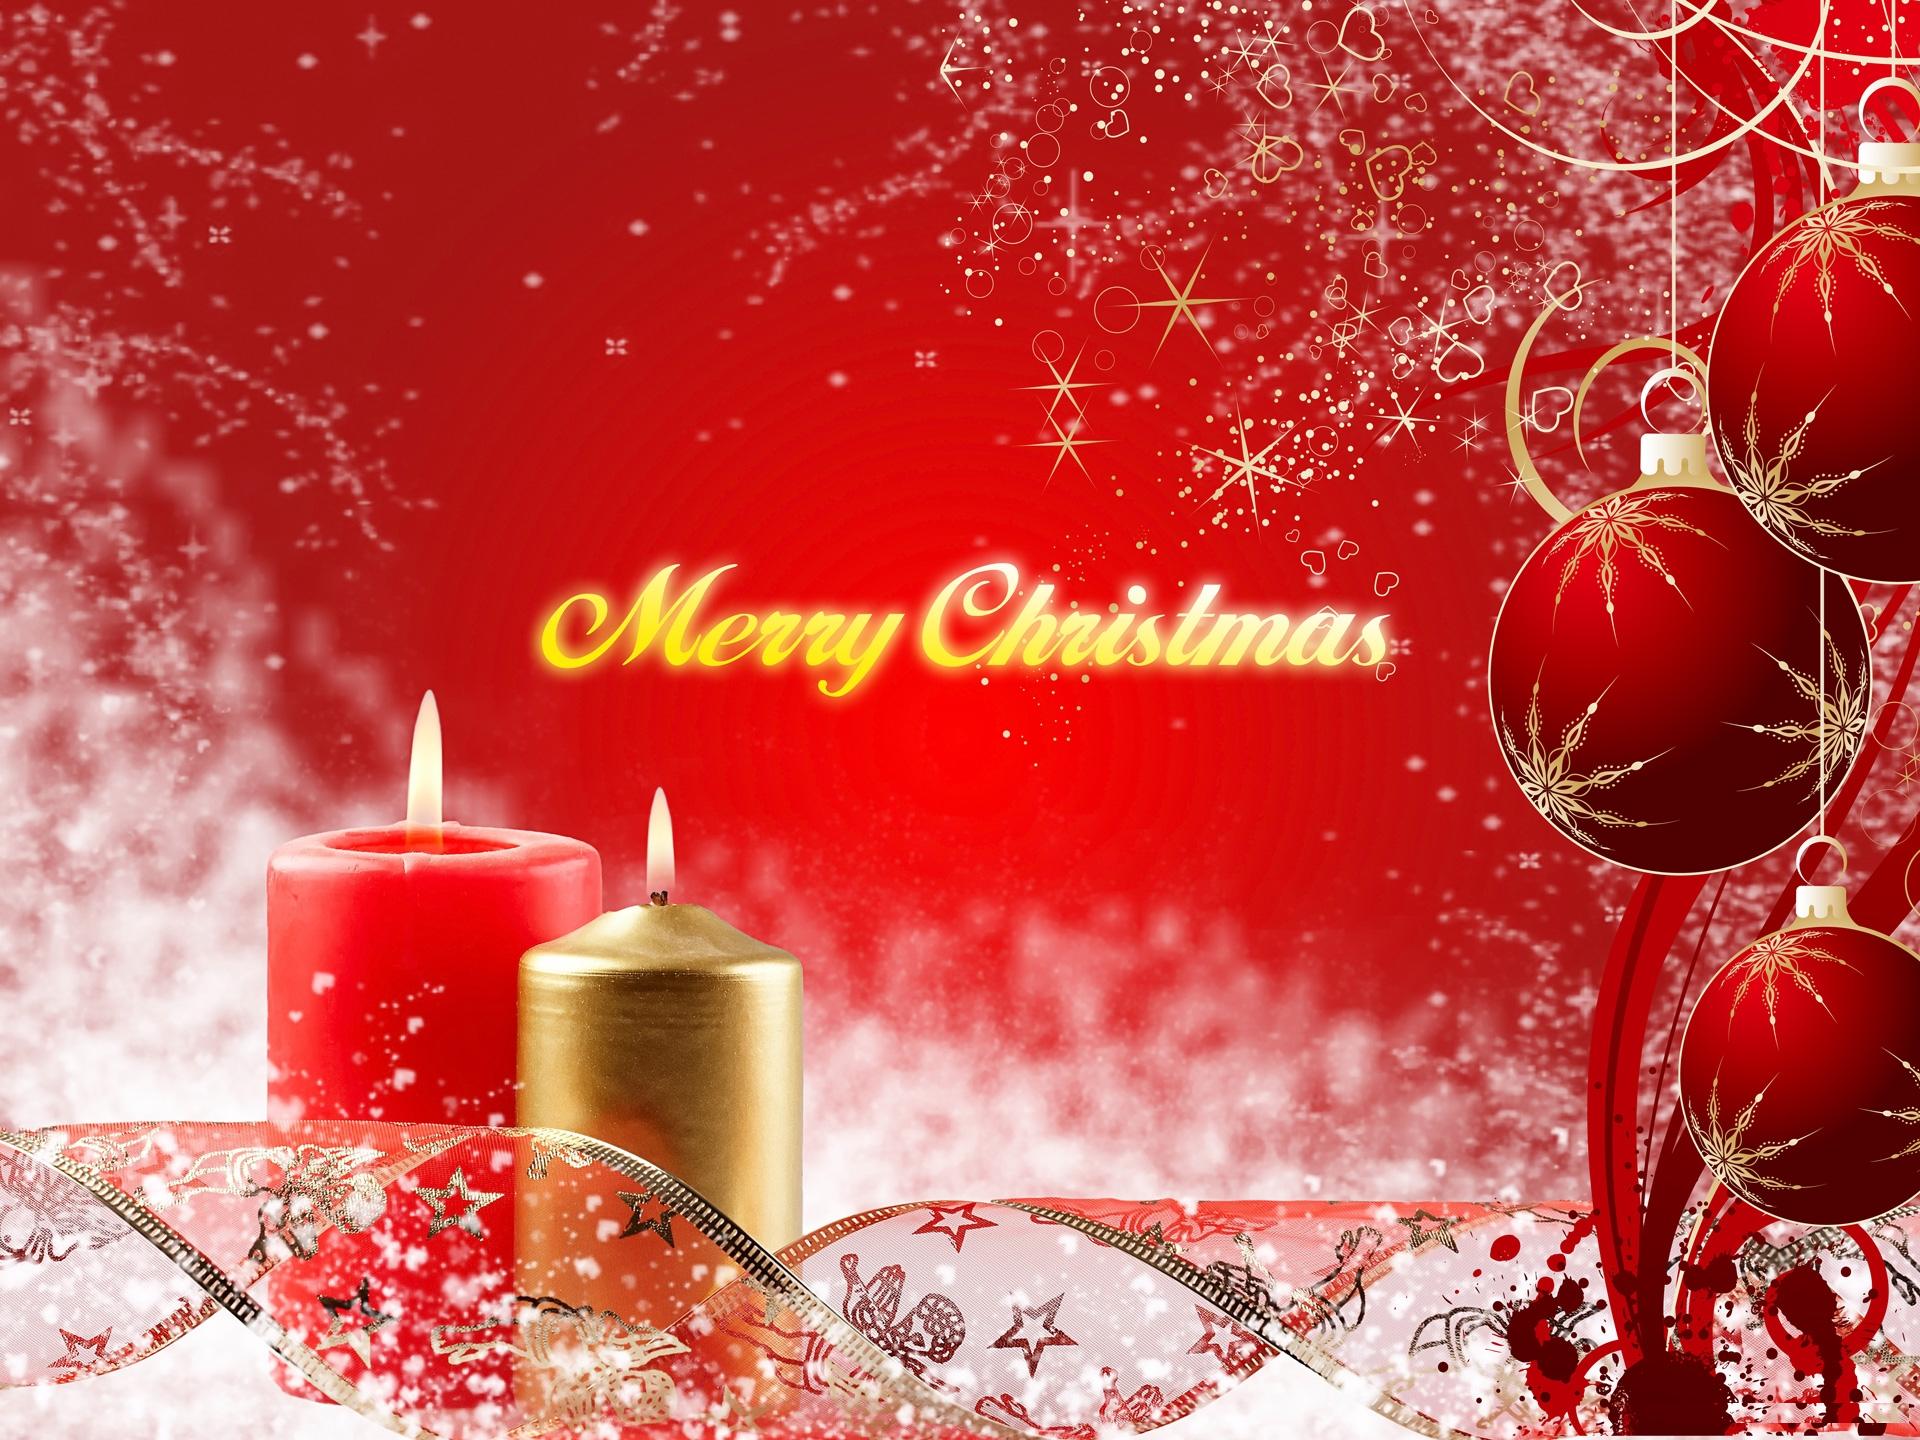 Christmas HD Wallpapers Christmas Desktop Images Cool Backgrounds